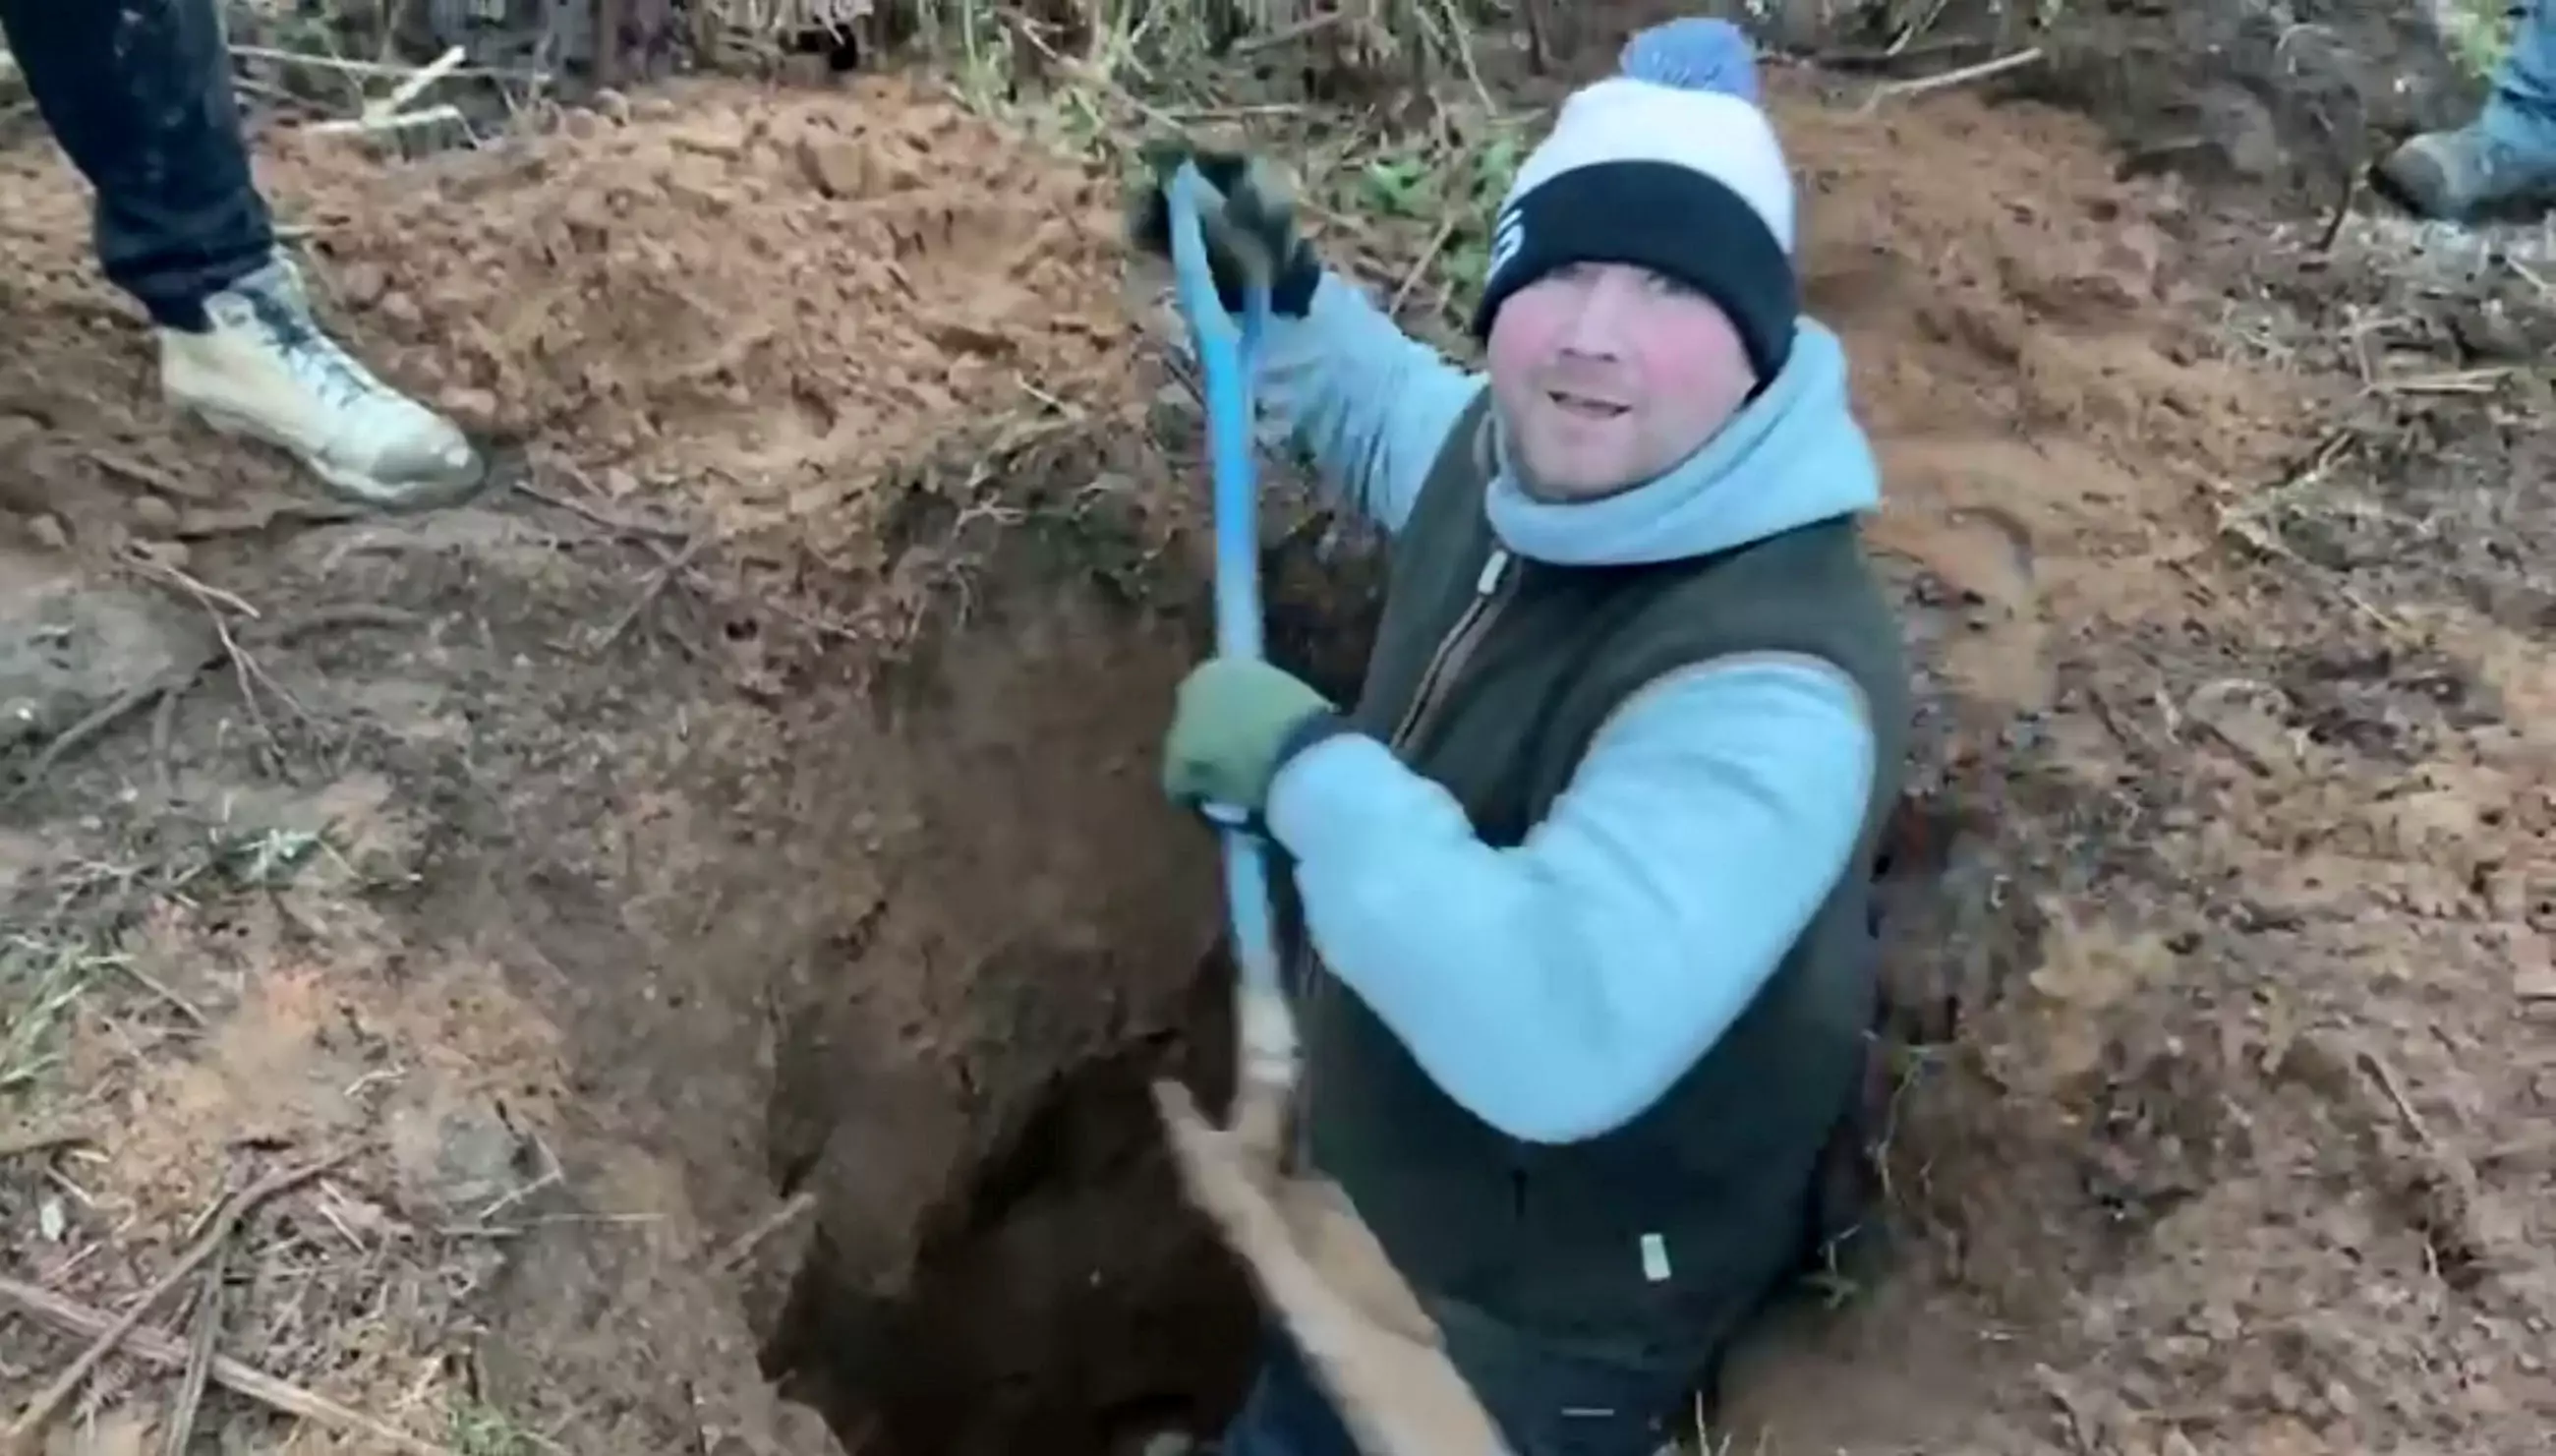 They started digging after spotting a rabbit hole (